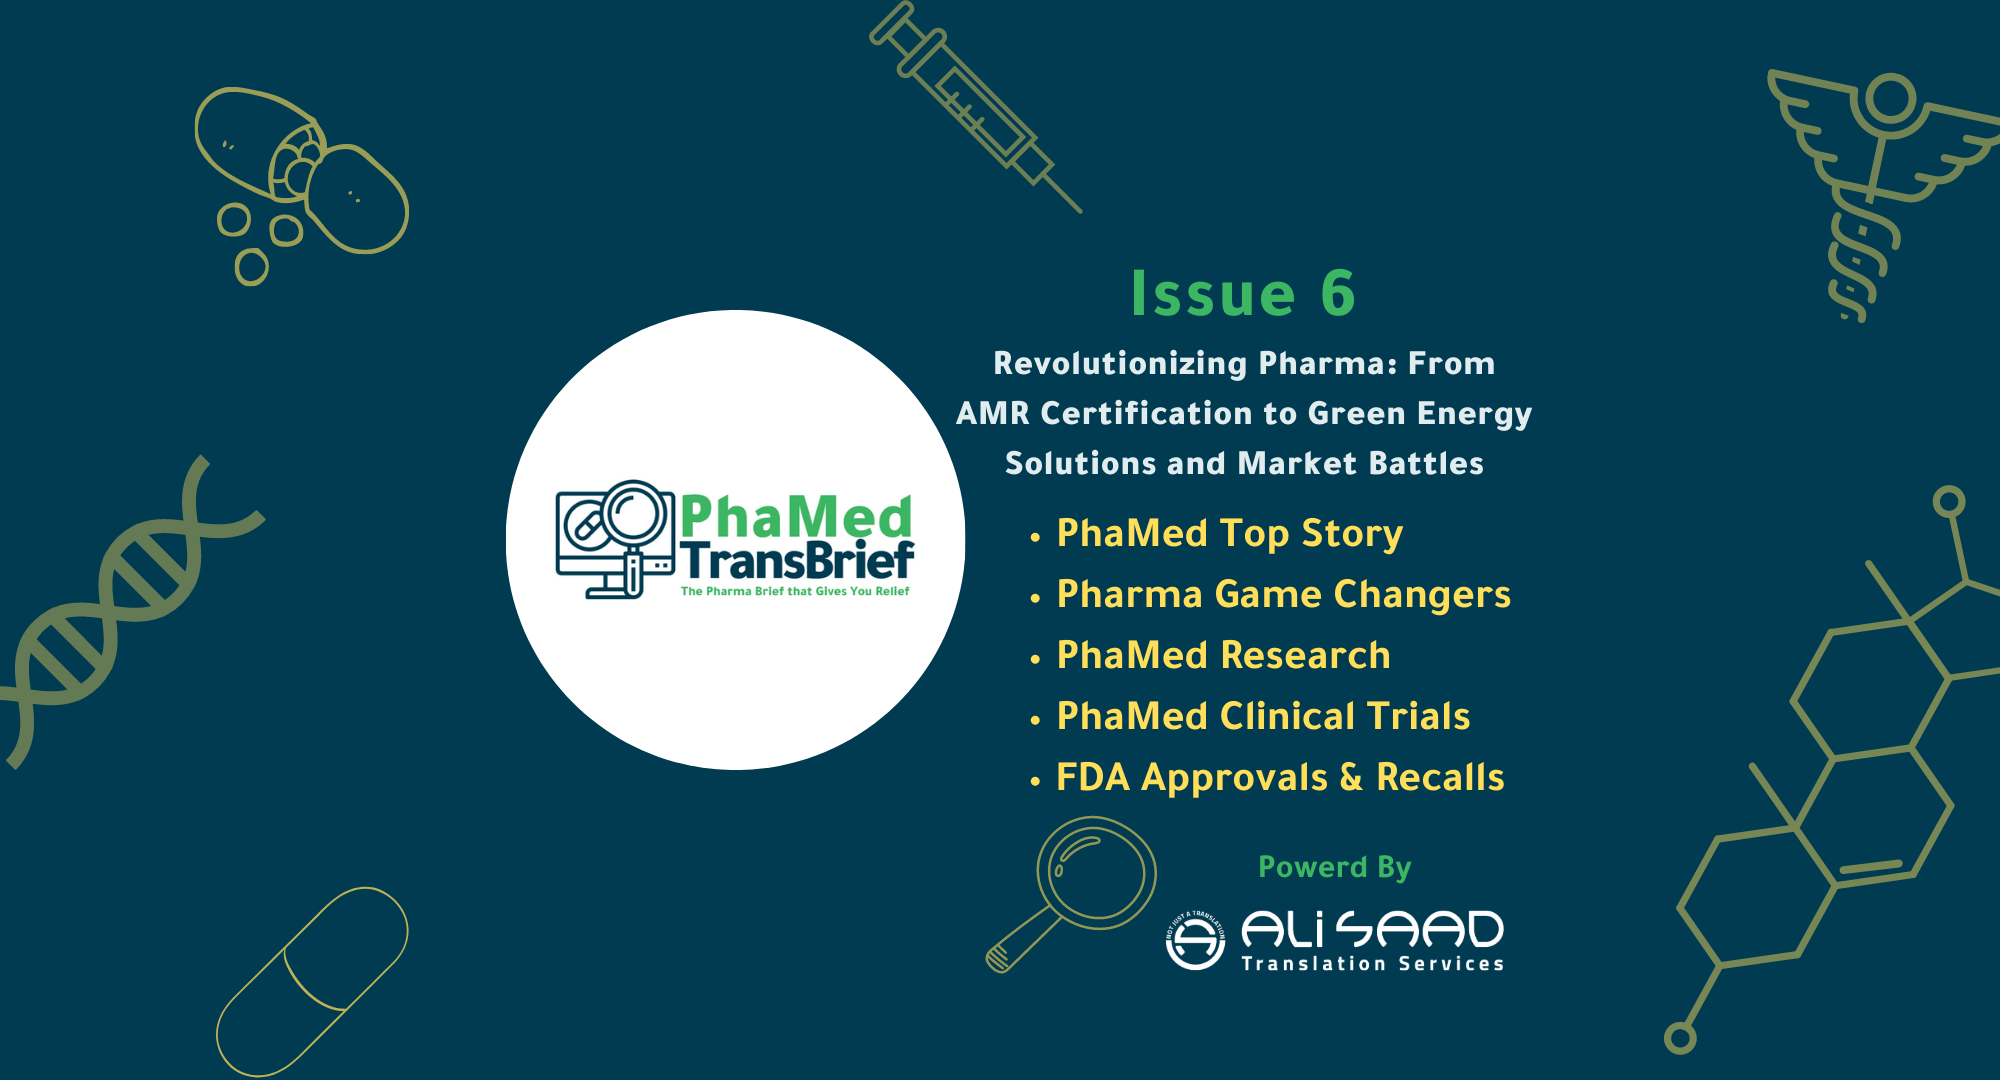 PhaMed Issue 6 Web Version Featured Image, made by Ali Saad Arabic Translation Services for Pharma Industry Professionals.